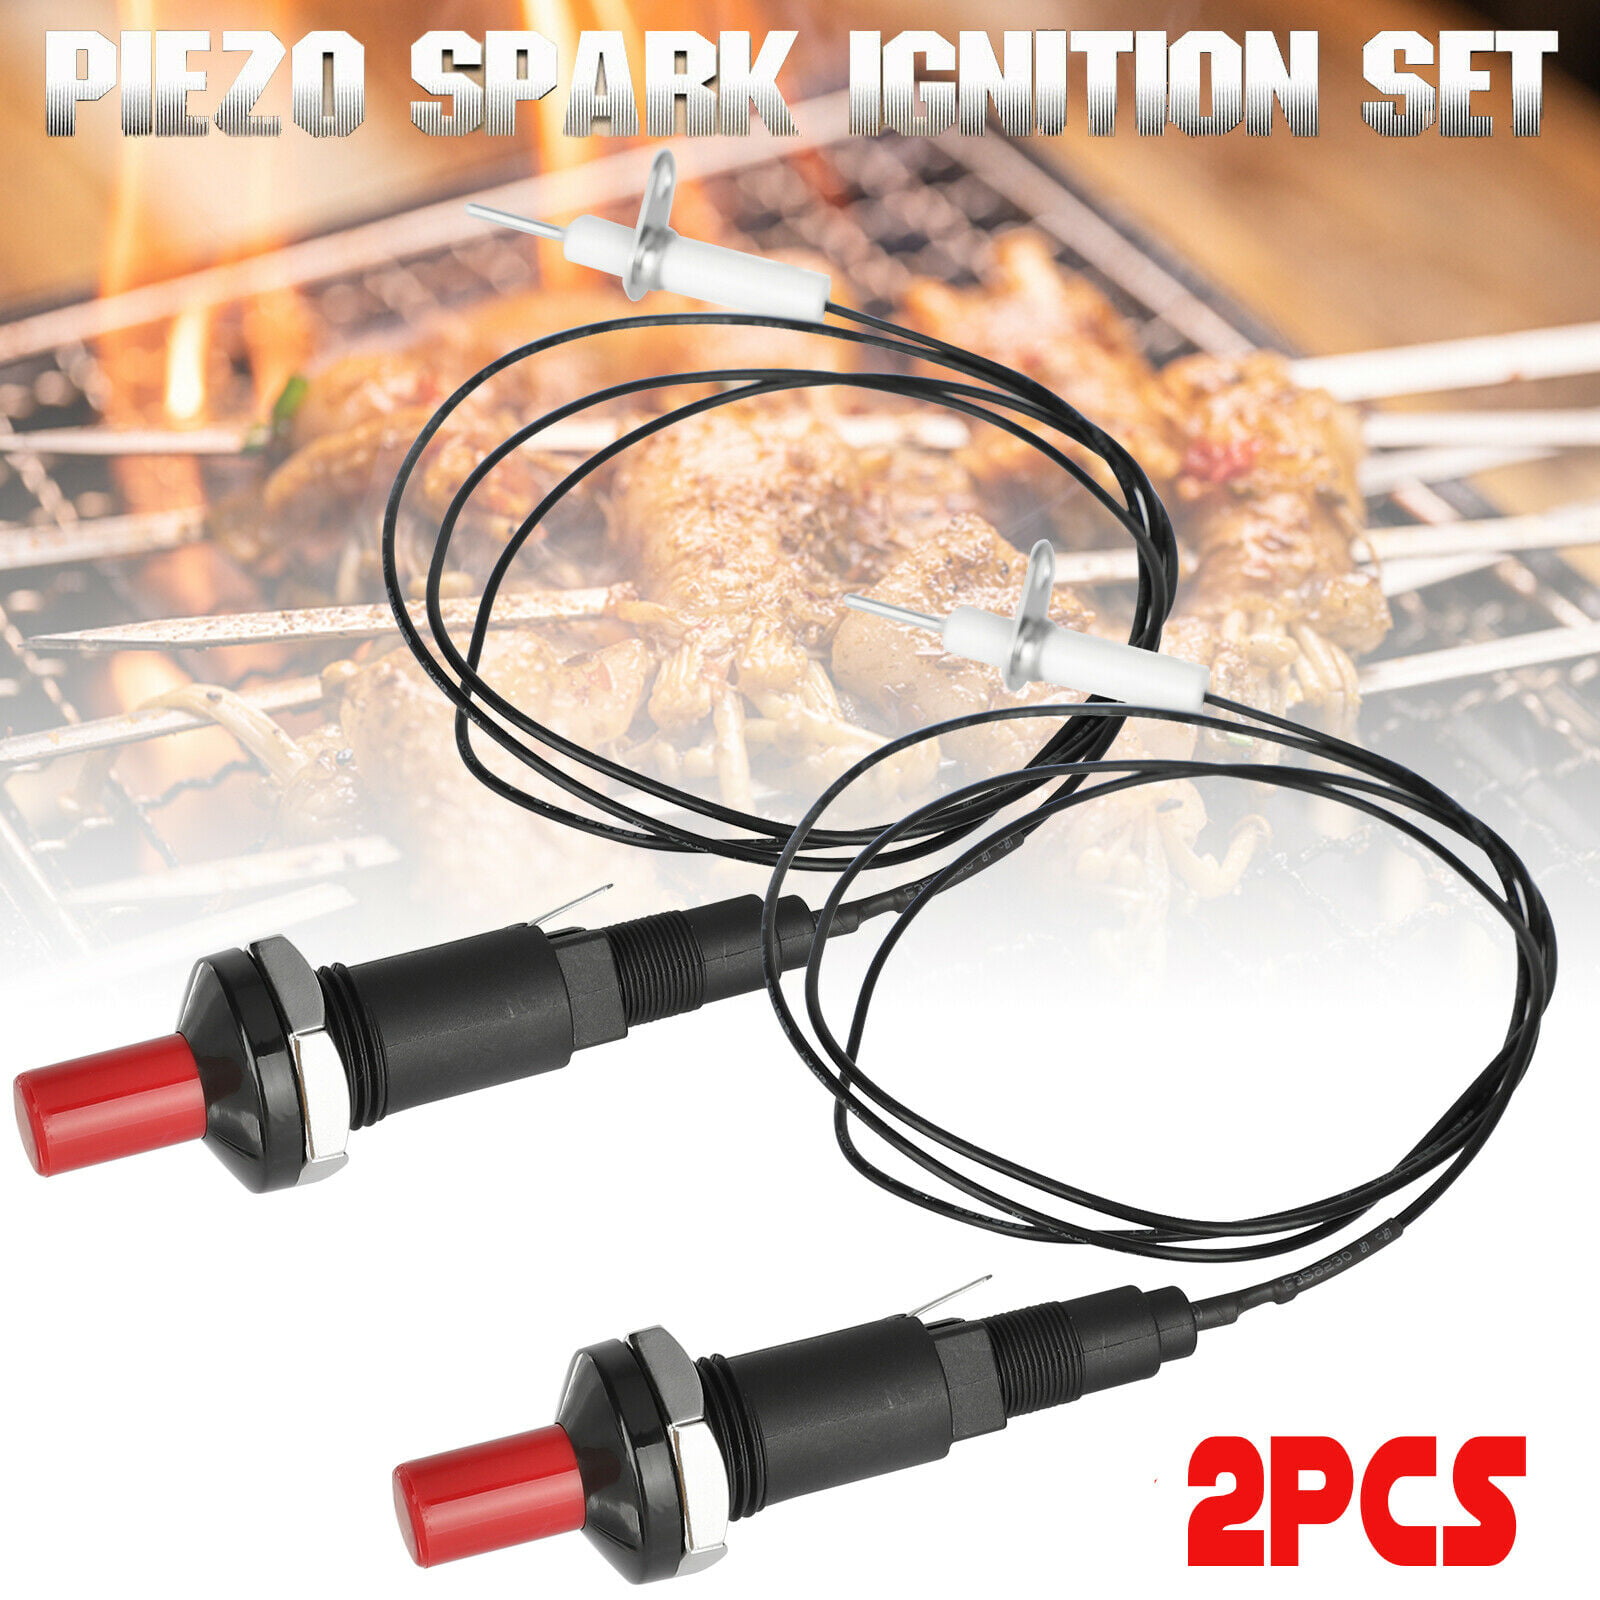 Cable 1000mm Gas Grill Push Button Igniter Universal Piezo Spark Ignition Kit